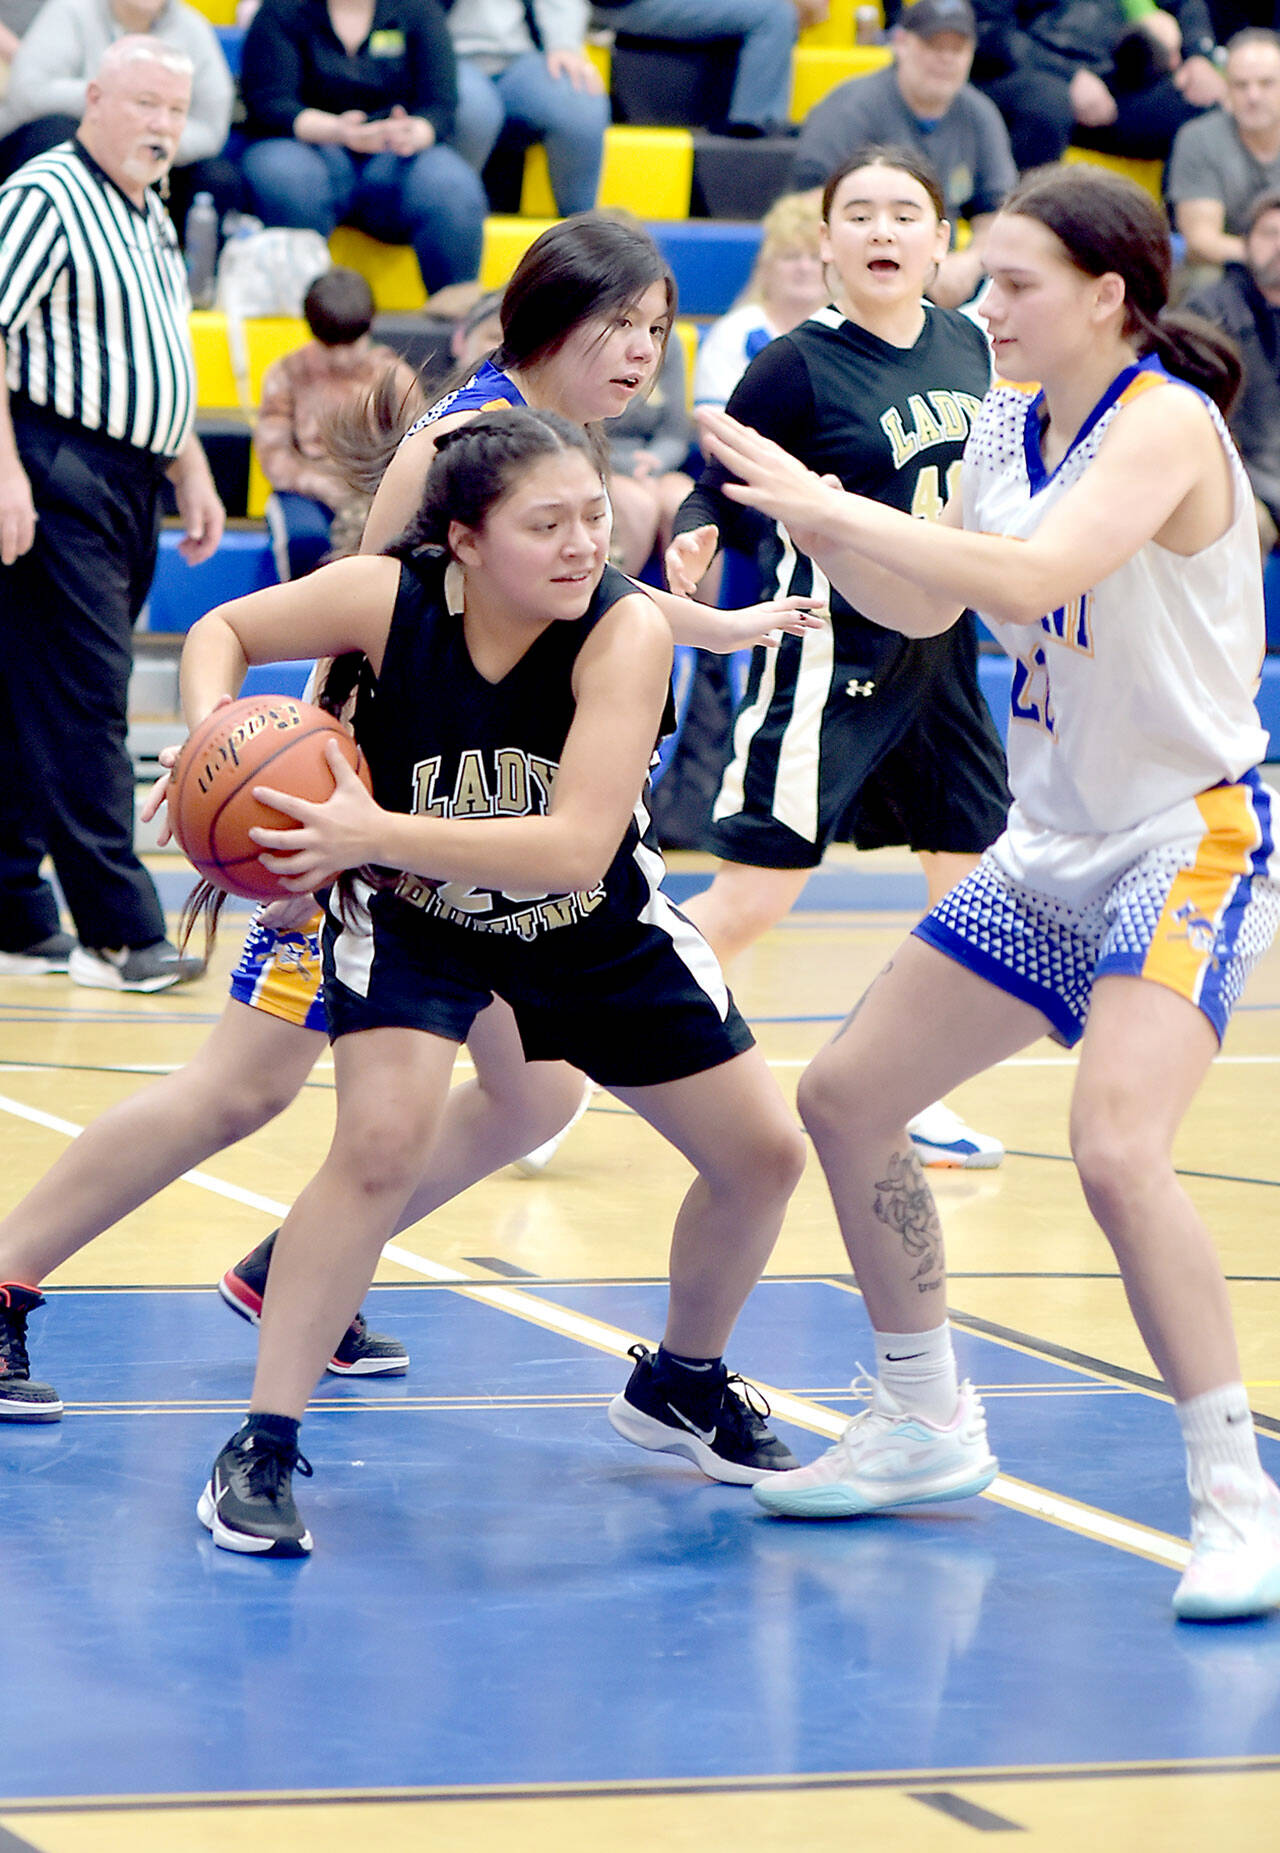 Clallam Bay’s Simona Cruz-Lopez, left, grabs a rebound and tries to evade Crescent’s Chloe Ferro-May, right, while Crescent’s Mia Chester and Clallam Bay’s Aizhan Talantbek Kyzy look on from behind on Tuesday in the Crescent gym. (Keith Thorpe/Peninsula Daily News)